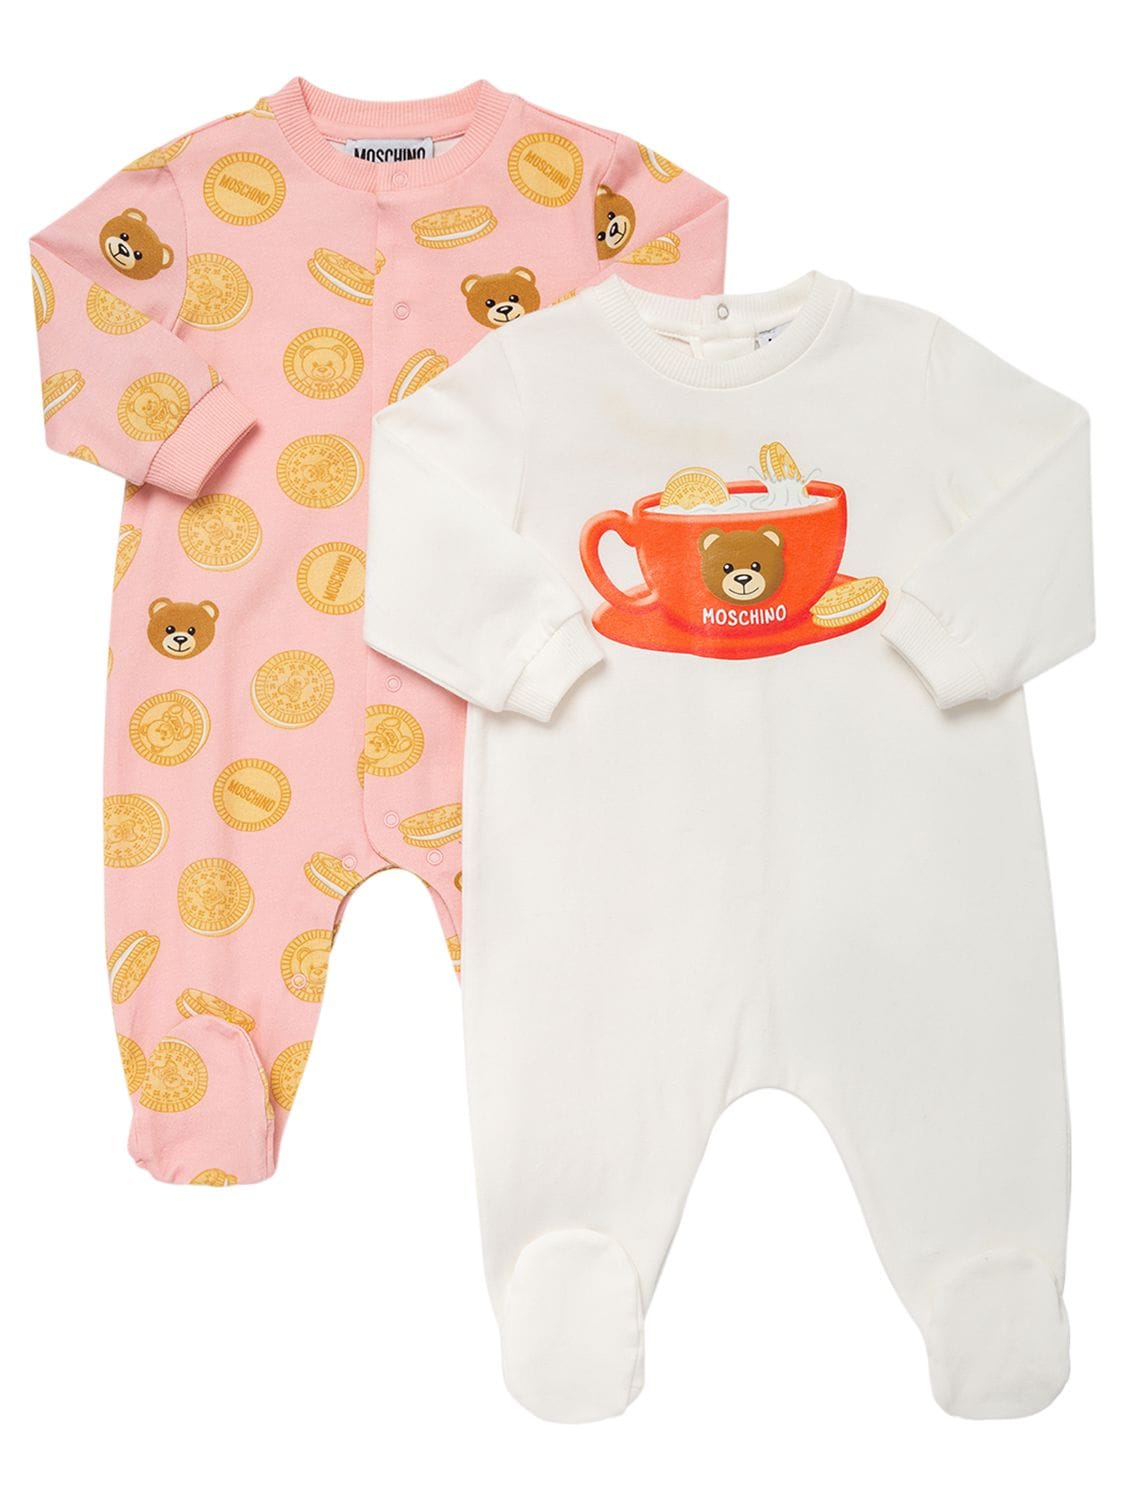 Moschino Babies' Set Of 2 Printed Cotton Rompers In Pink,white